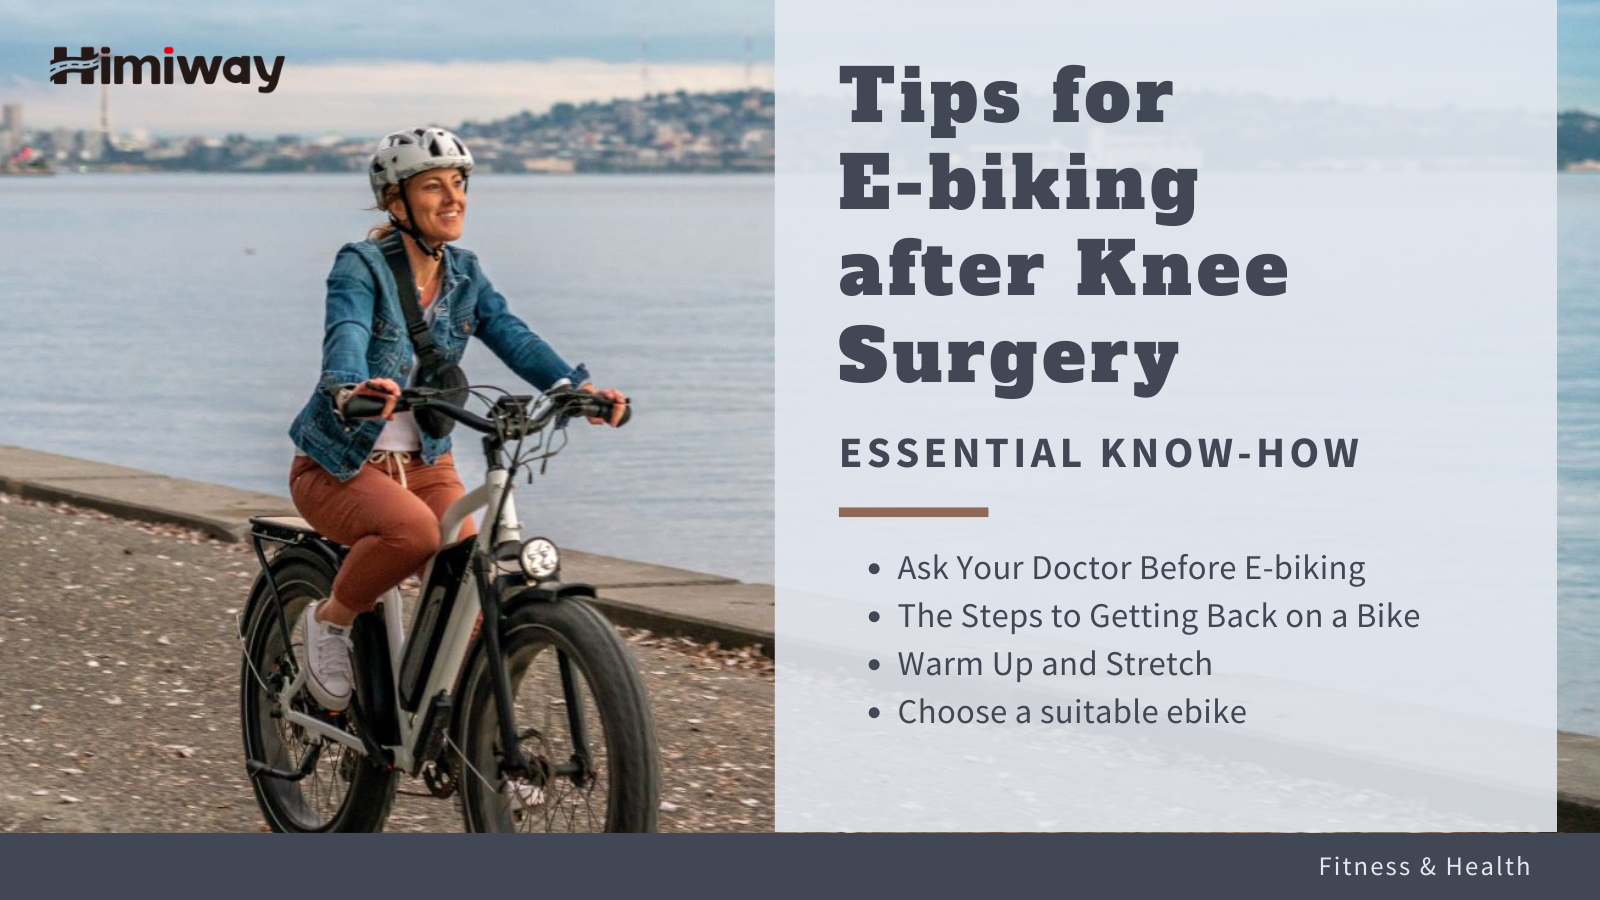 Tips for E-biking after Knee Surgery | Himiway